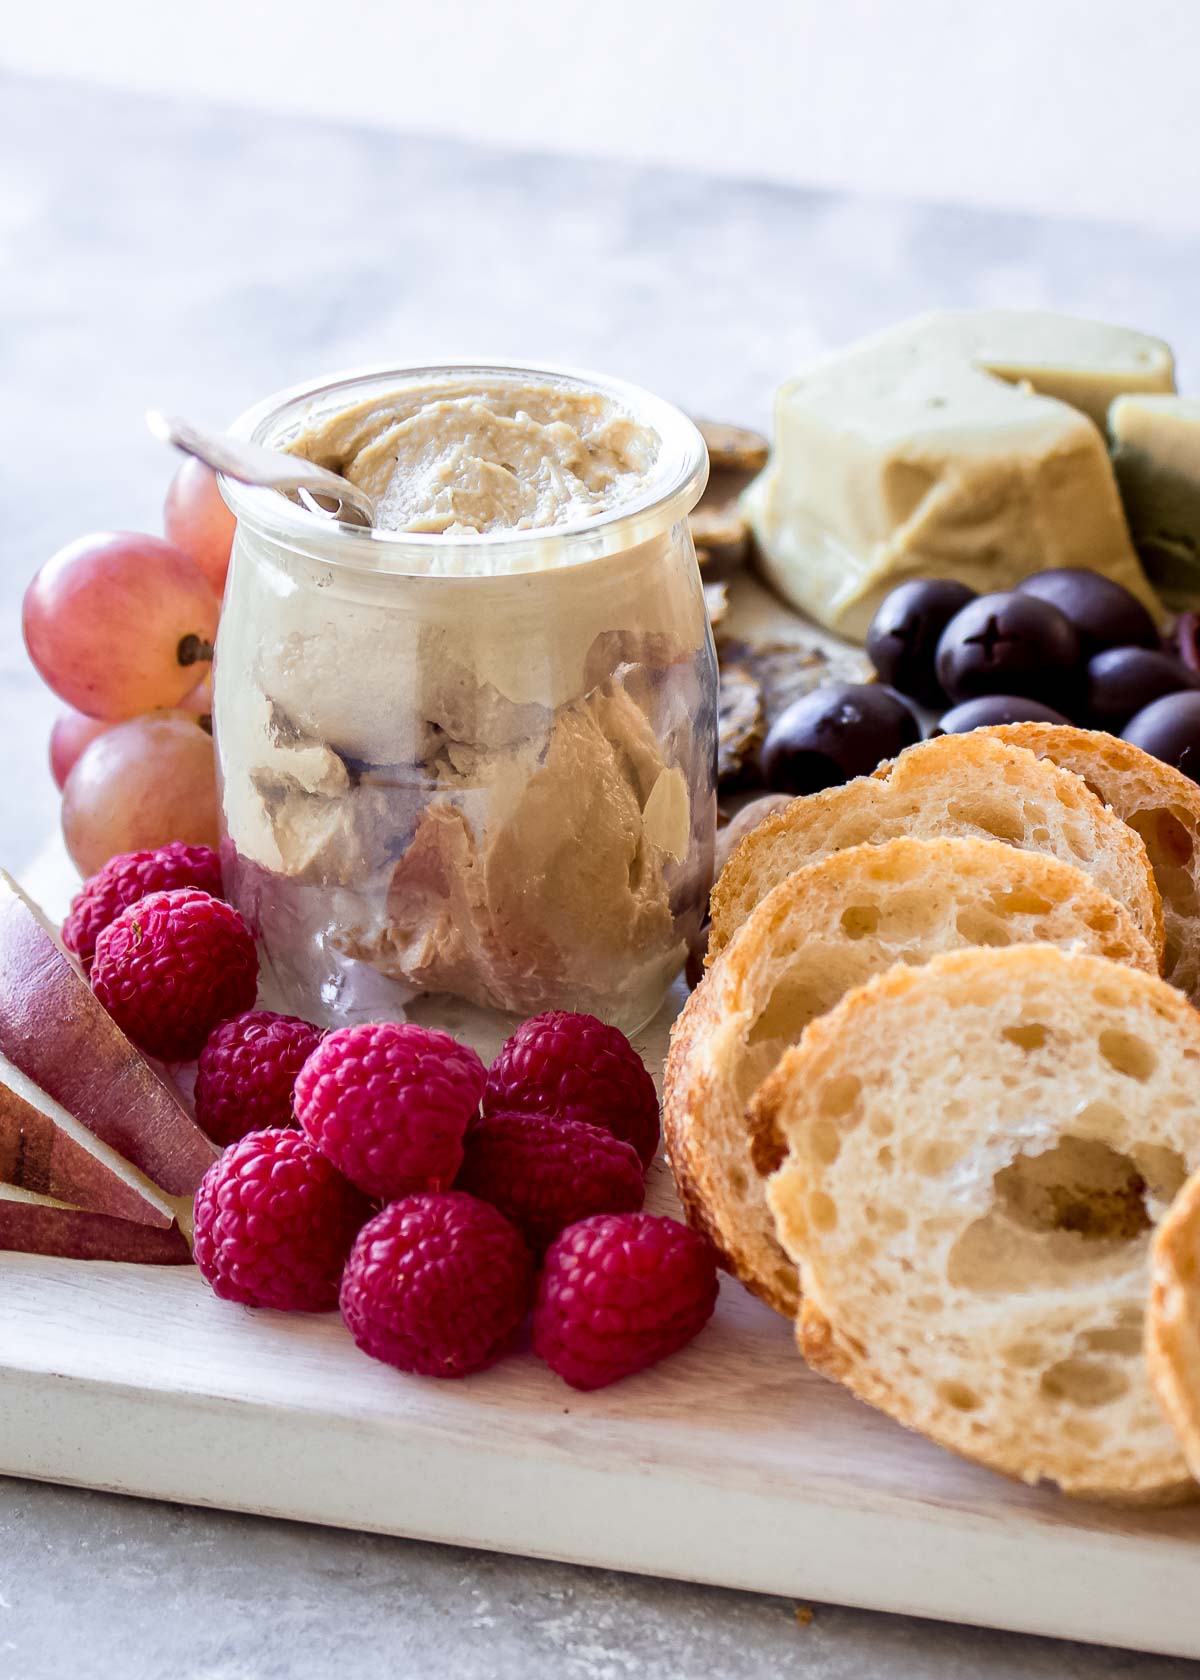 Section of vegan cheese board showing dip, artisan vegan cheese, bread, grapes and berries.